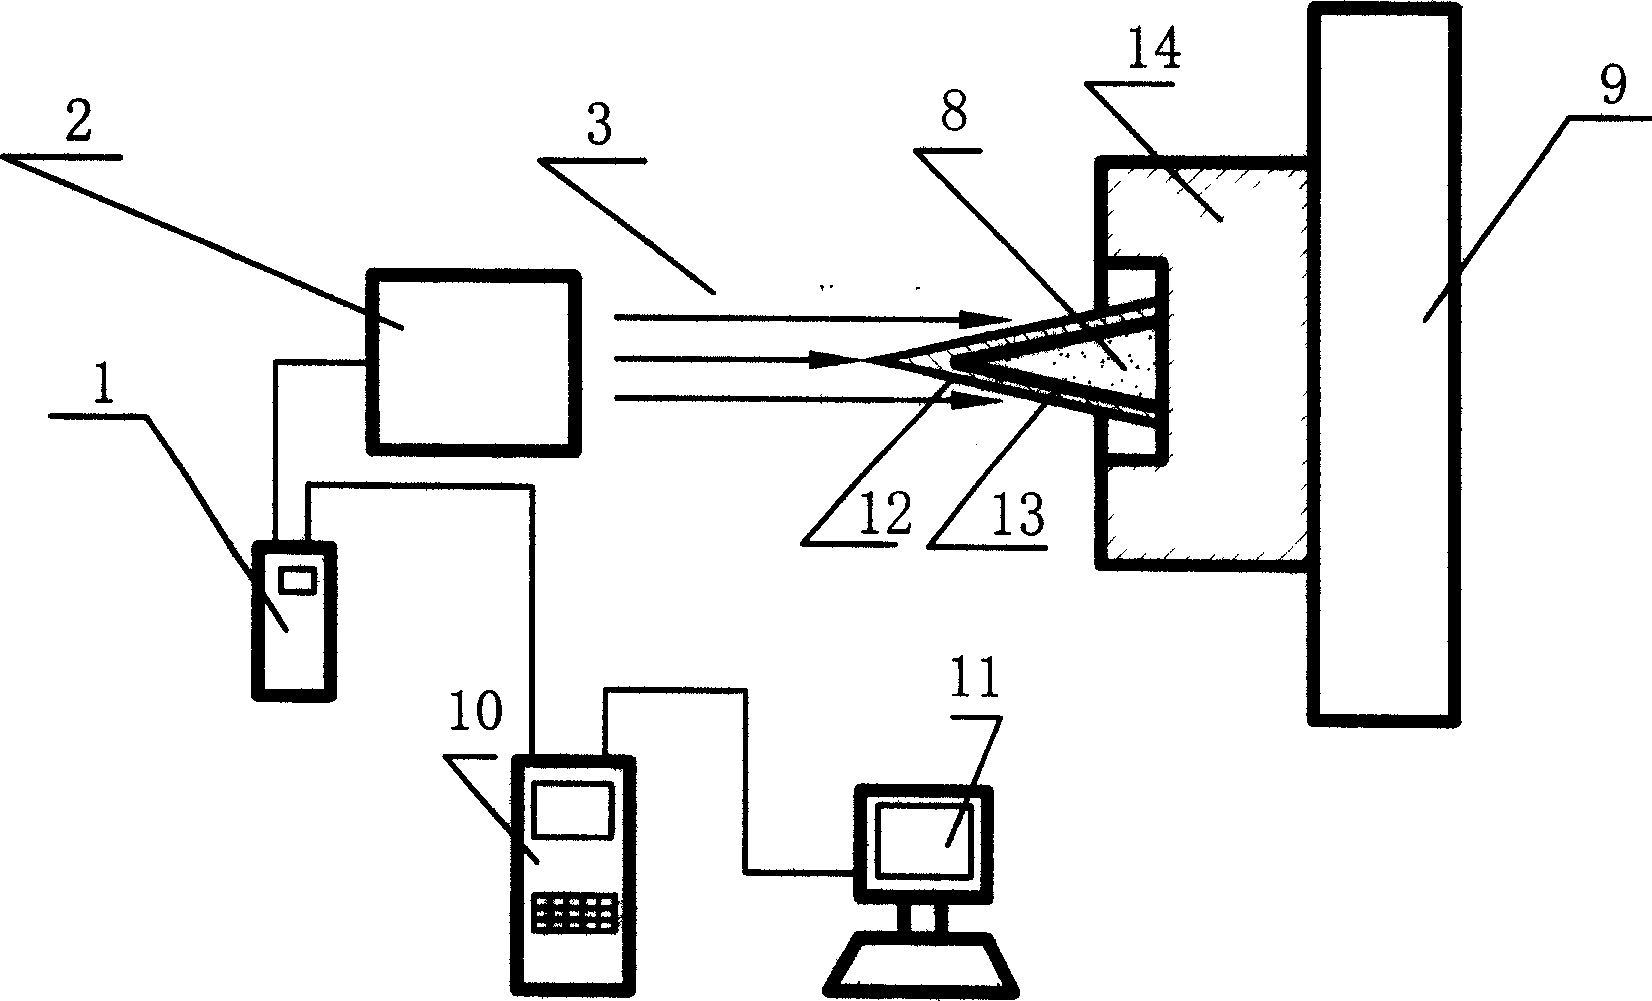 Powder pressing method and apparatus based on laser shock wave technology